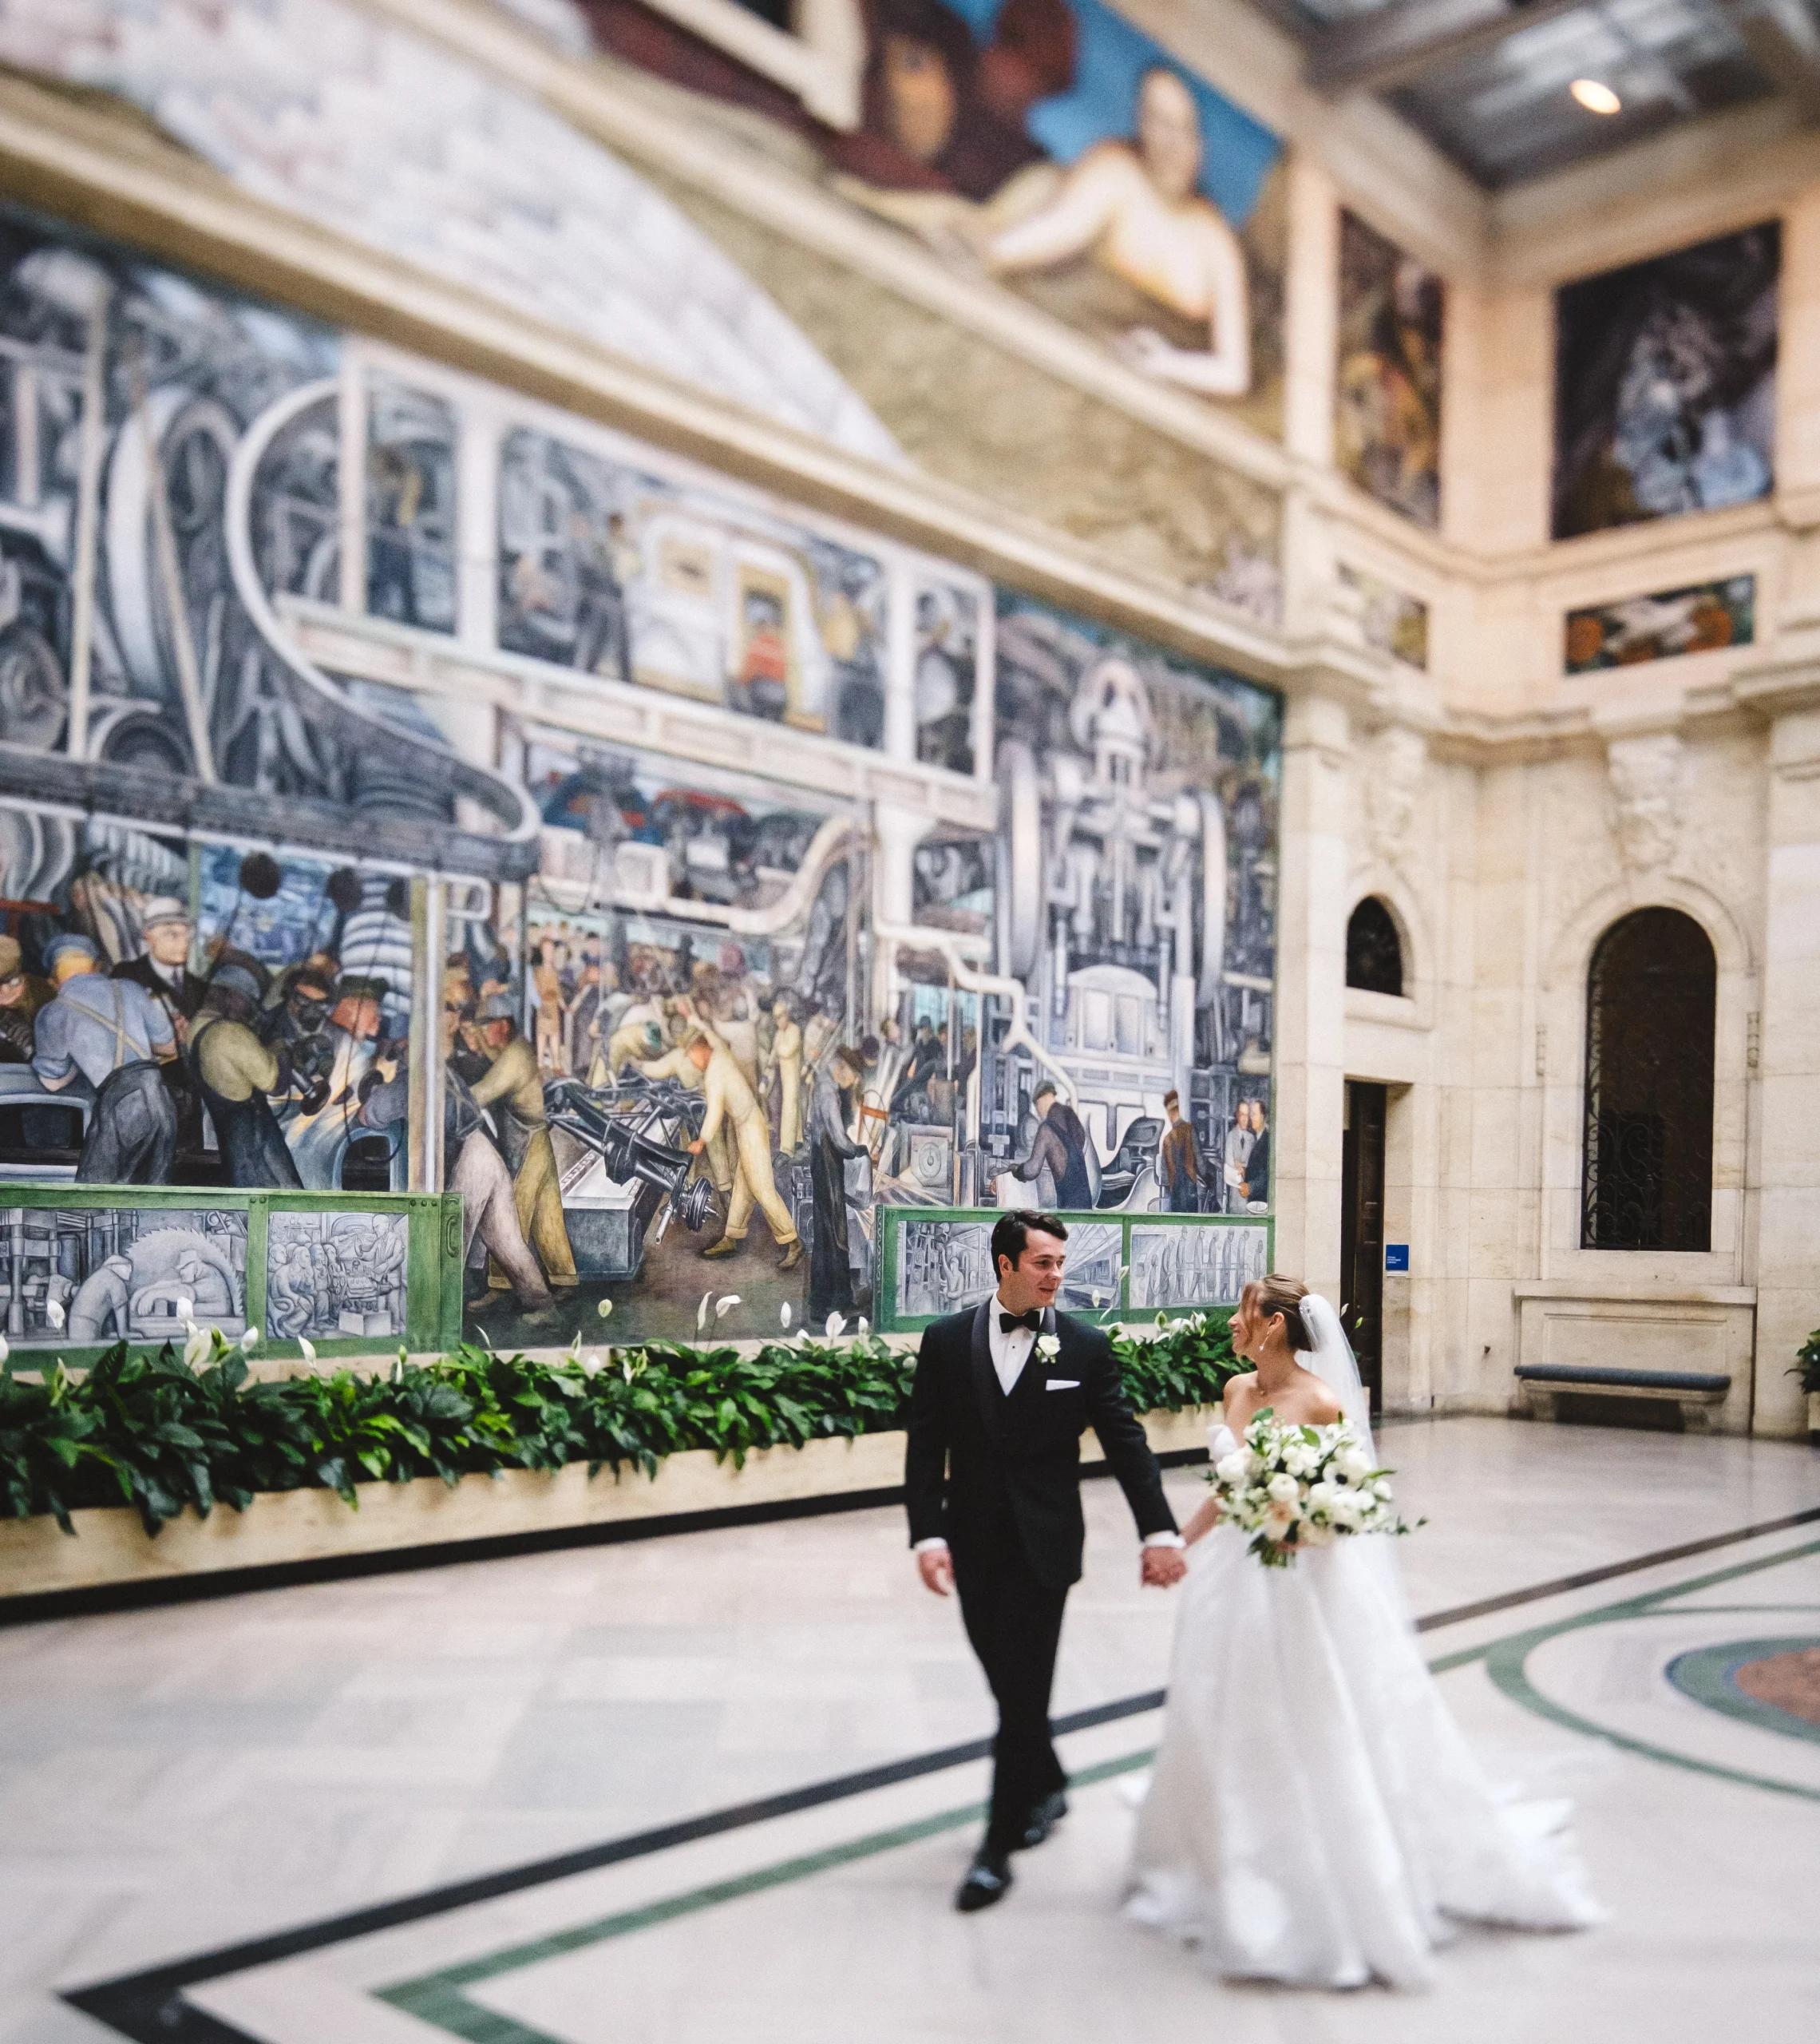 bride and groom holding hands while walking through a building with multiple murals on the walls